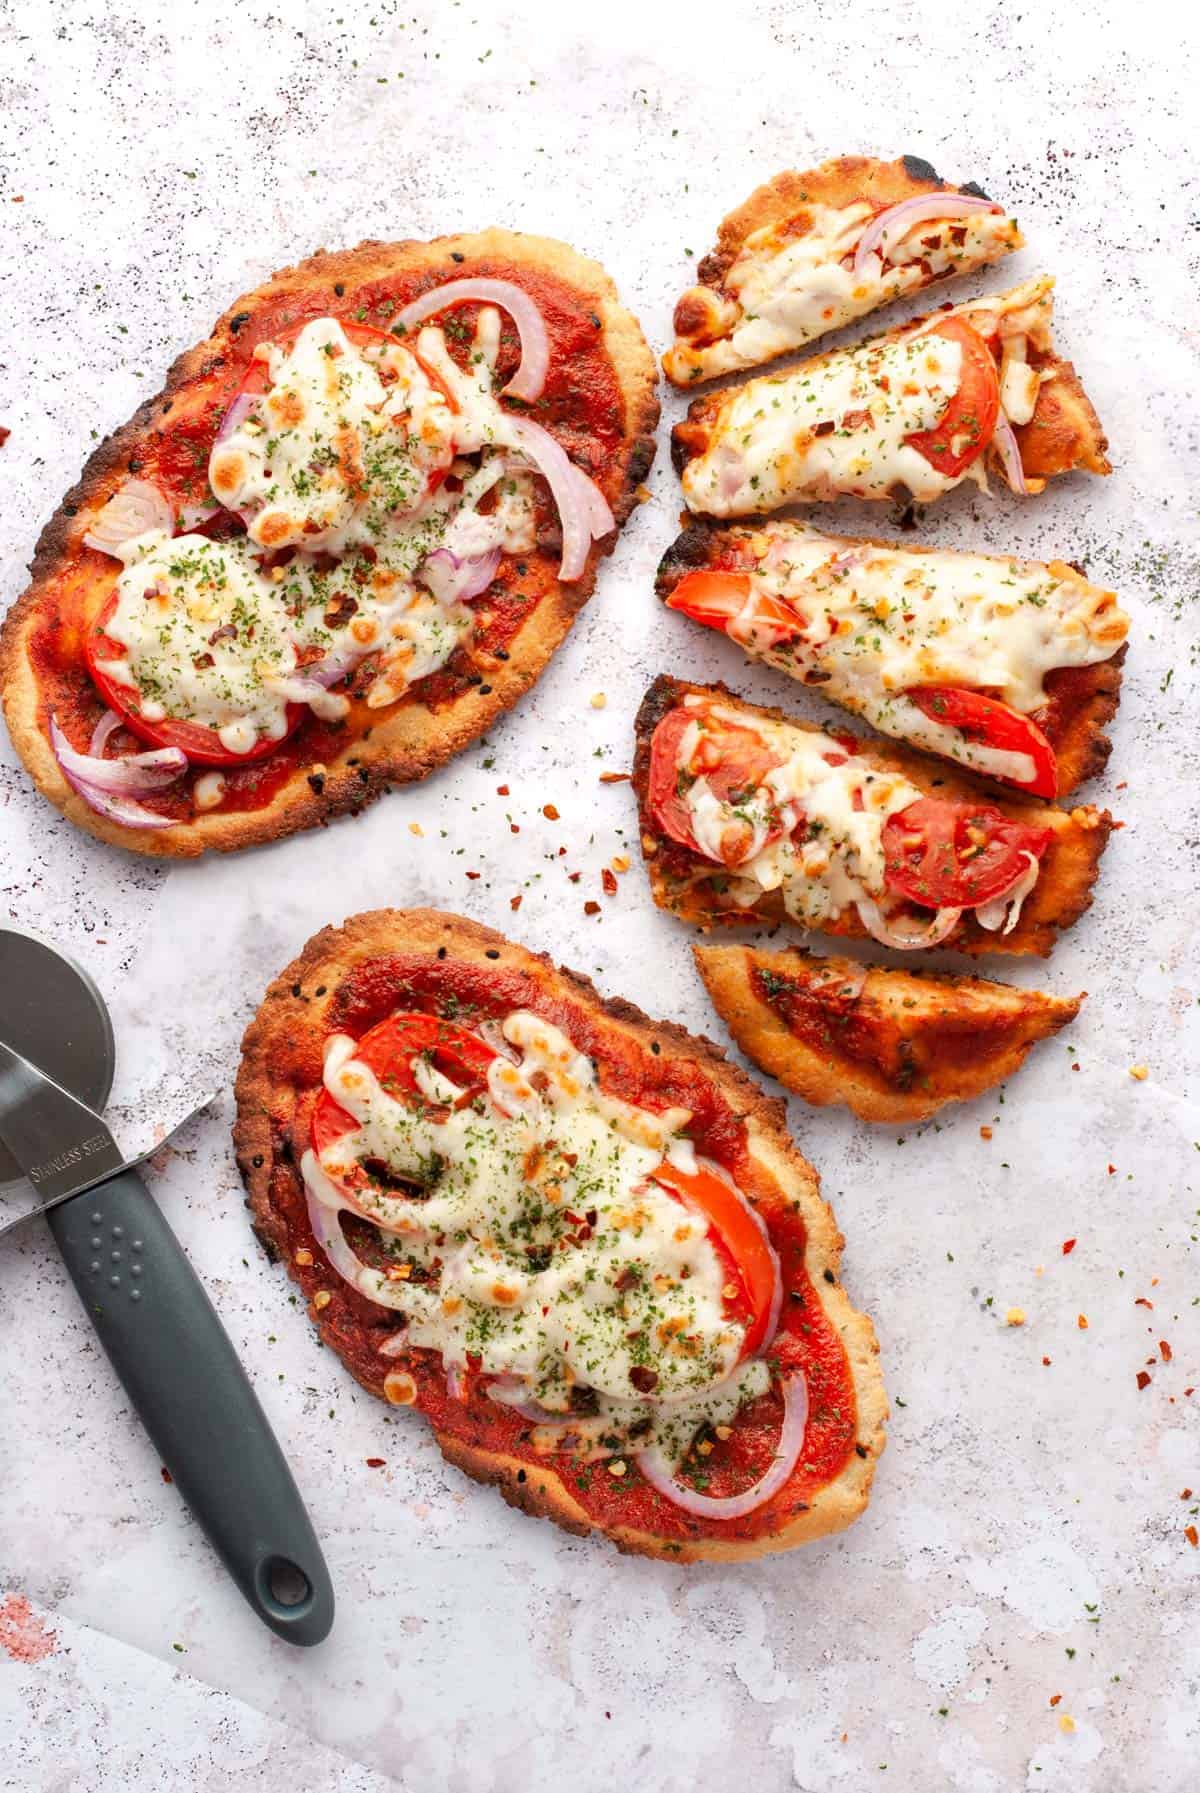 Top down view of three naan flatbread pizzas.